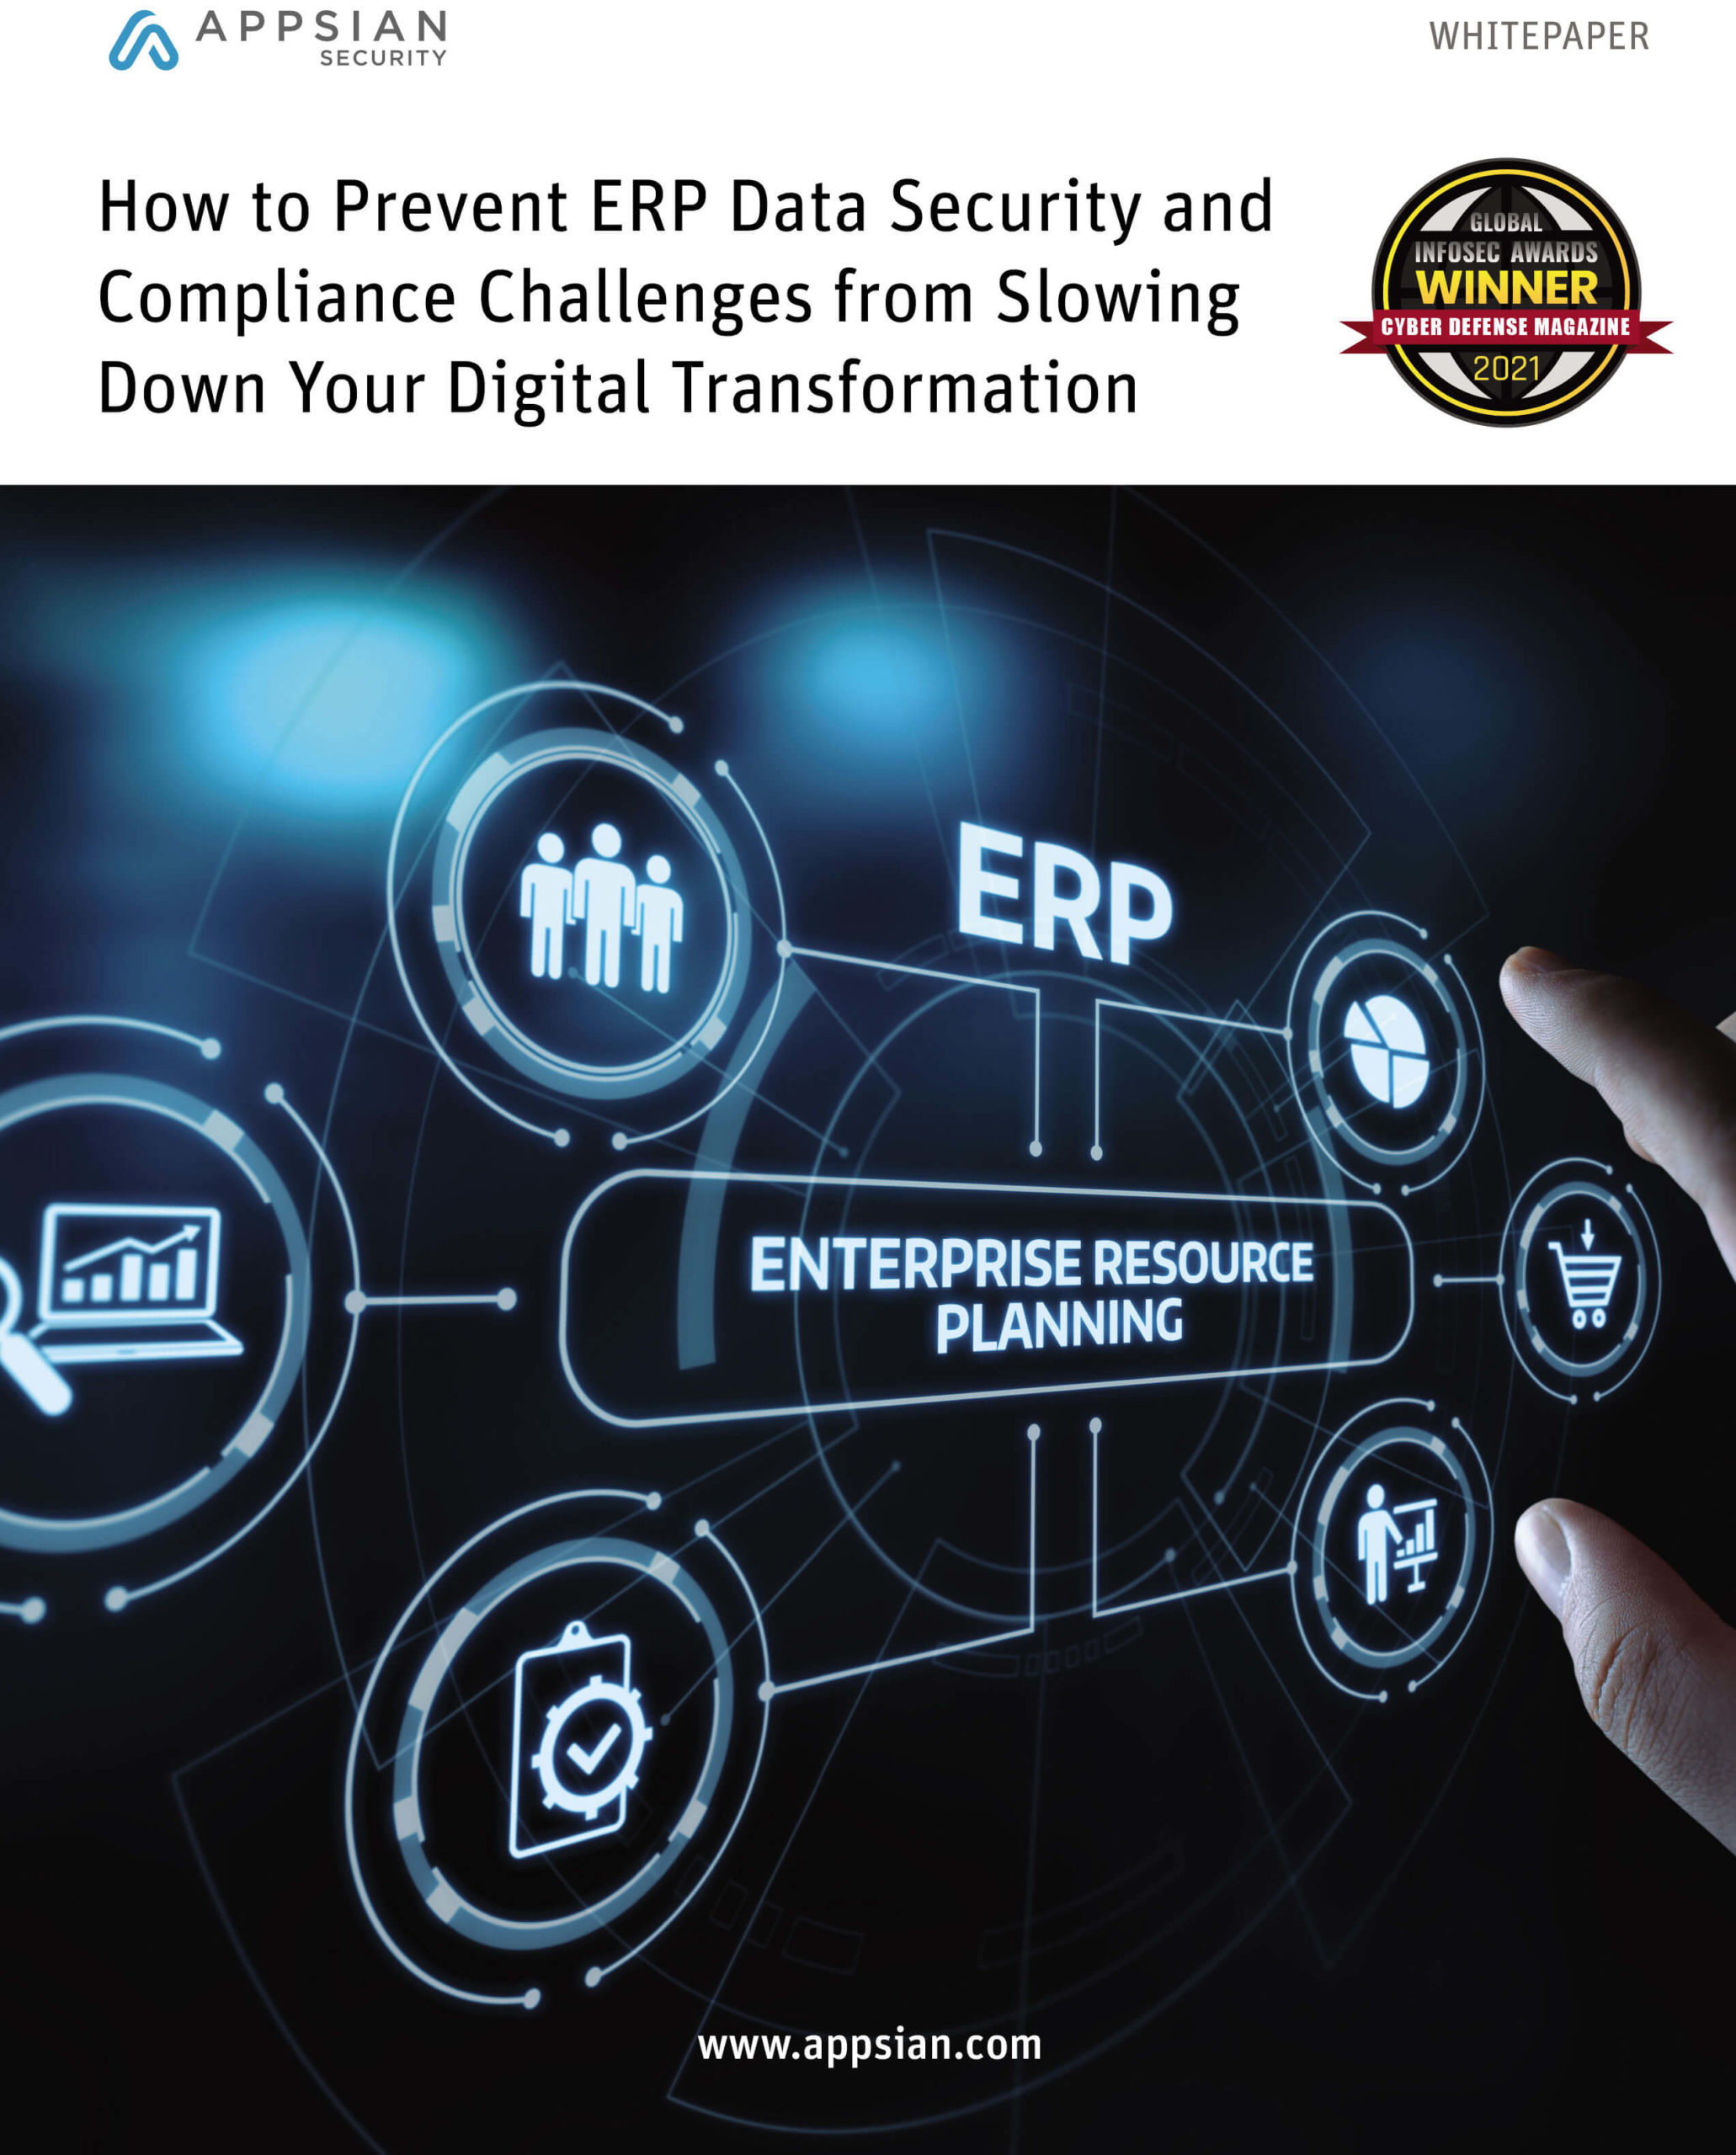 How to Prevent ERP Data Security and Compliance Challenges from Slowing Down Your Digital Transformation